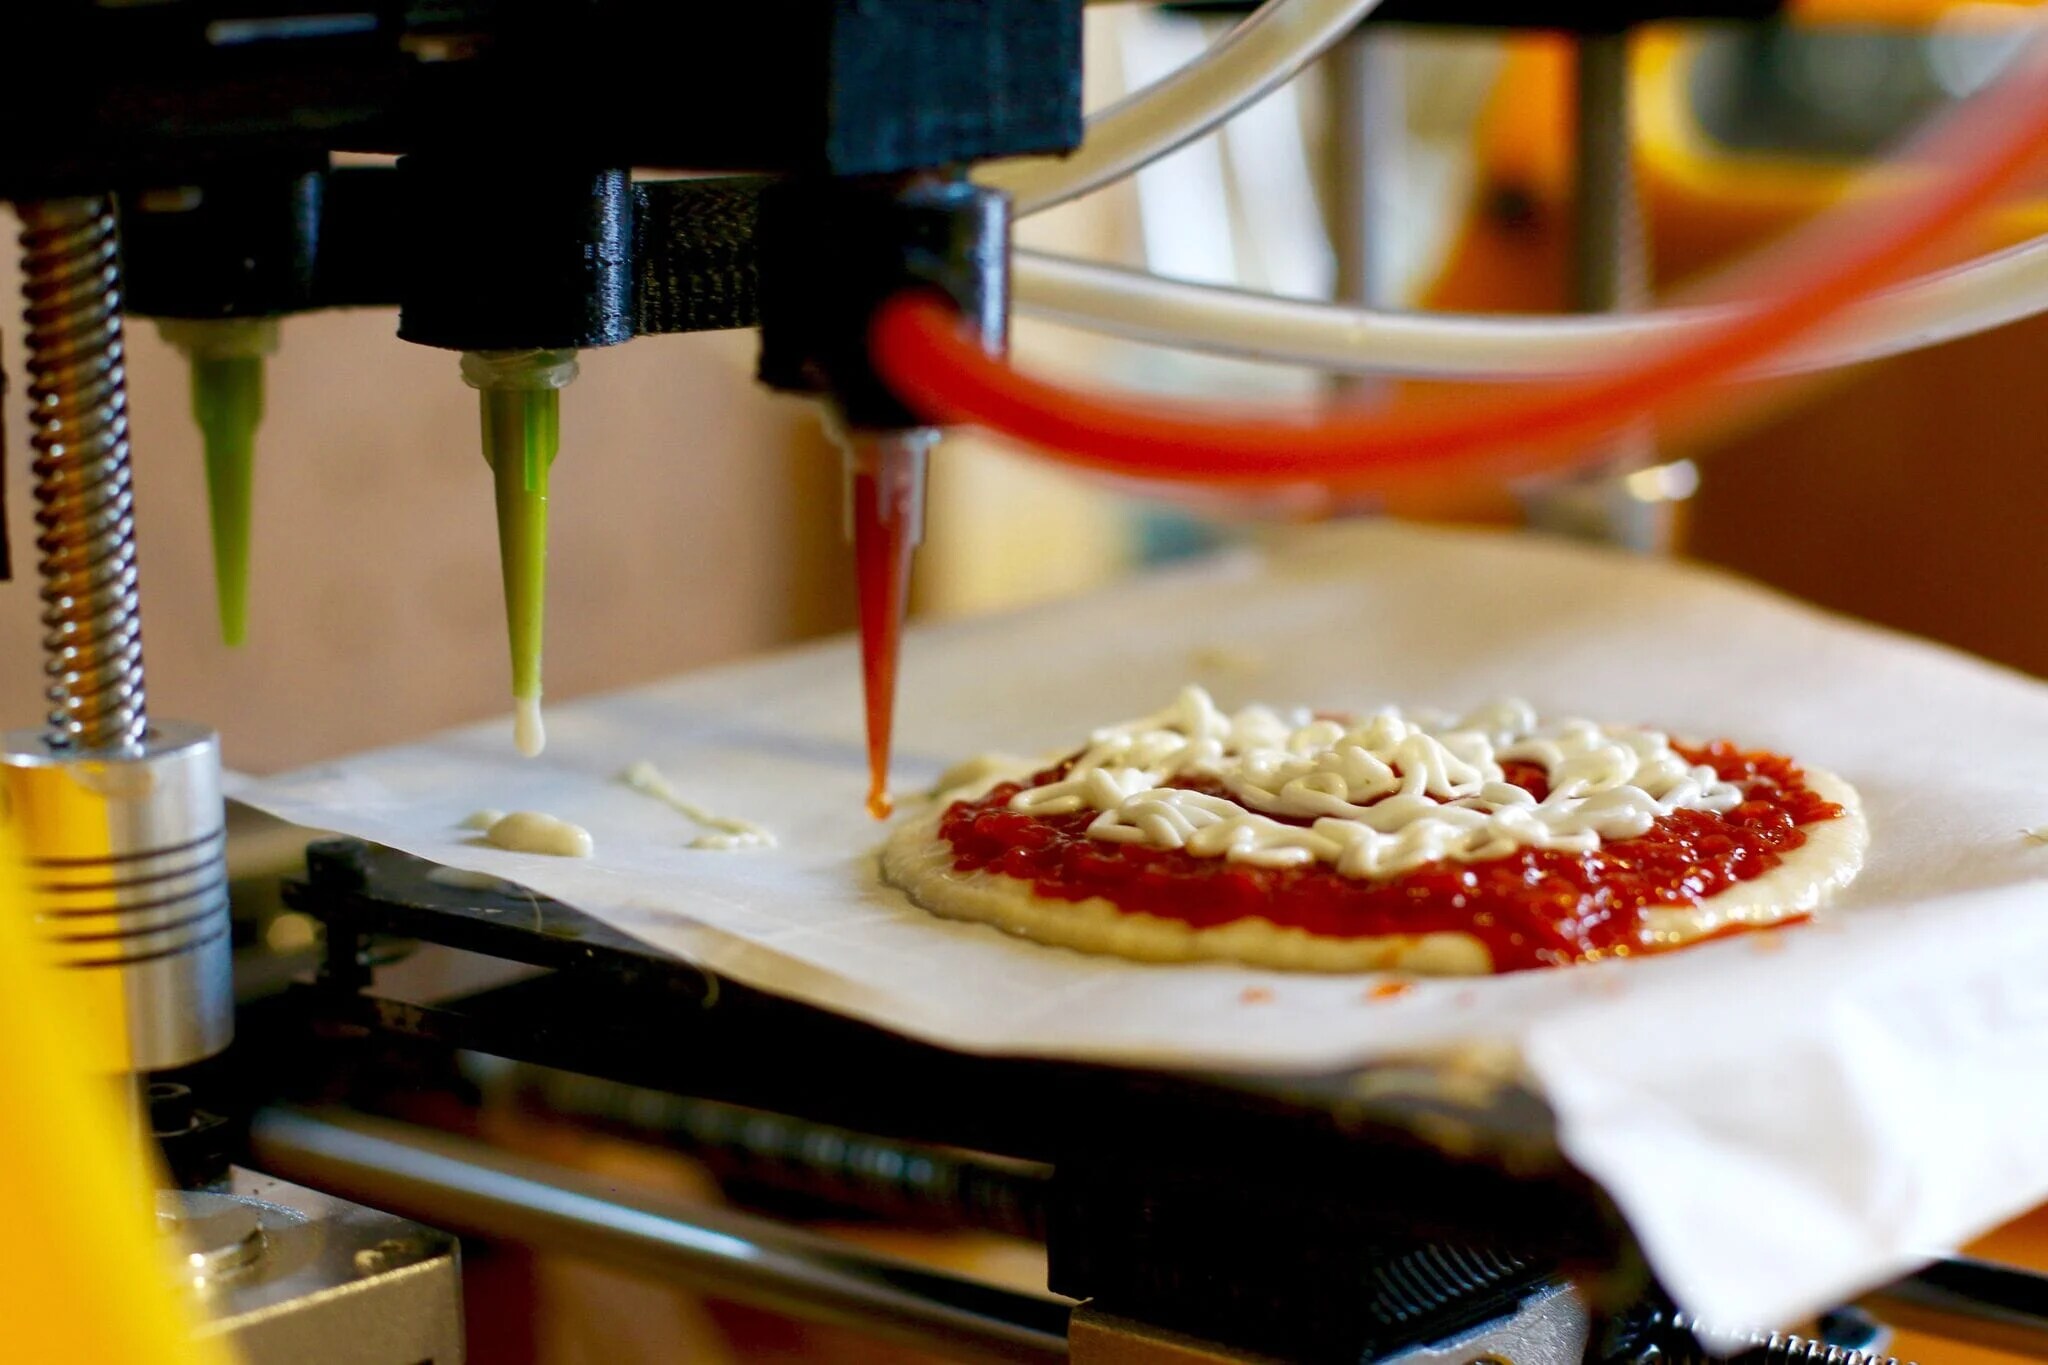 How Does 3D Printing Food Work